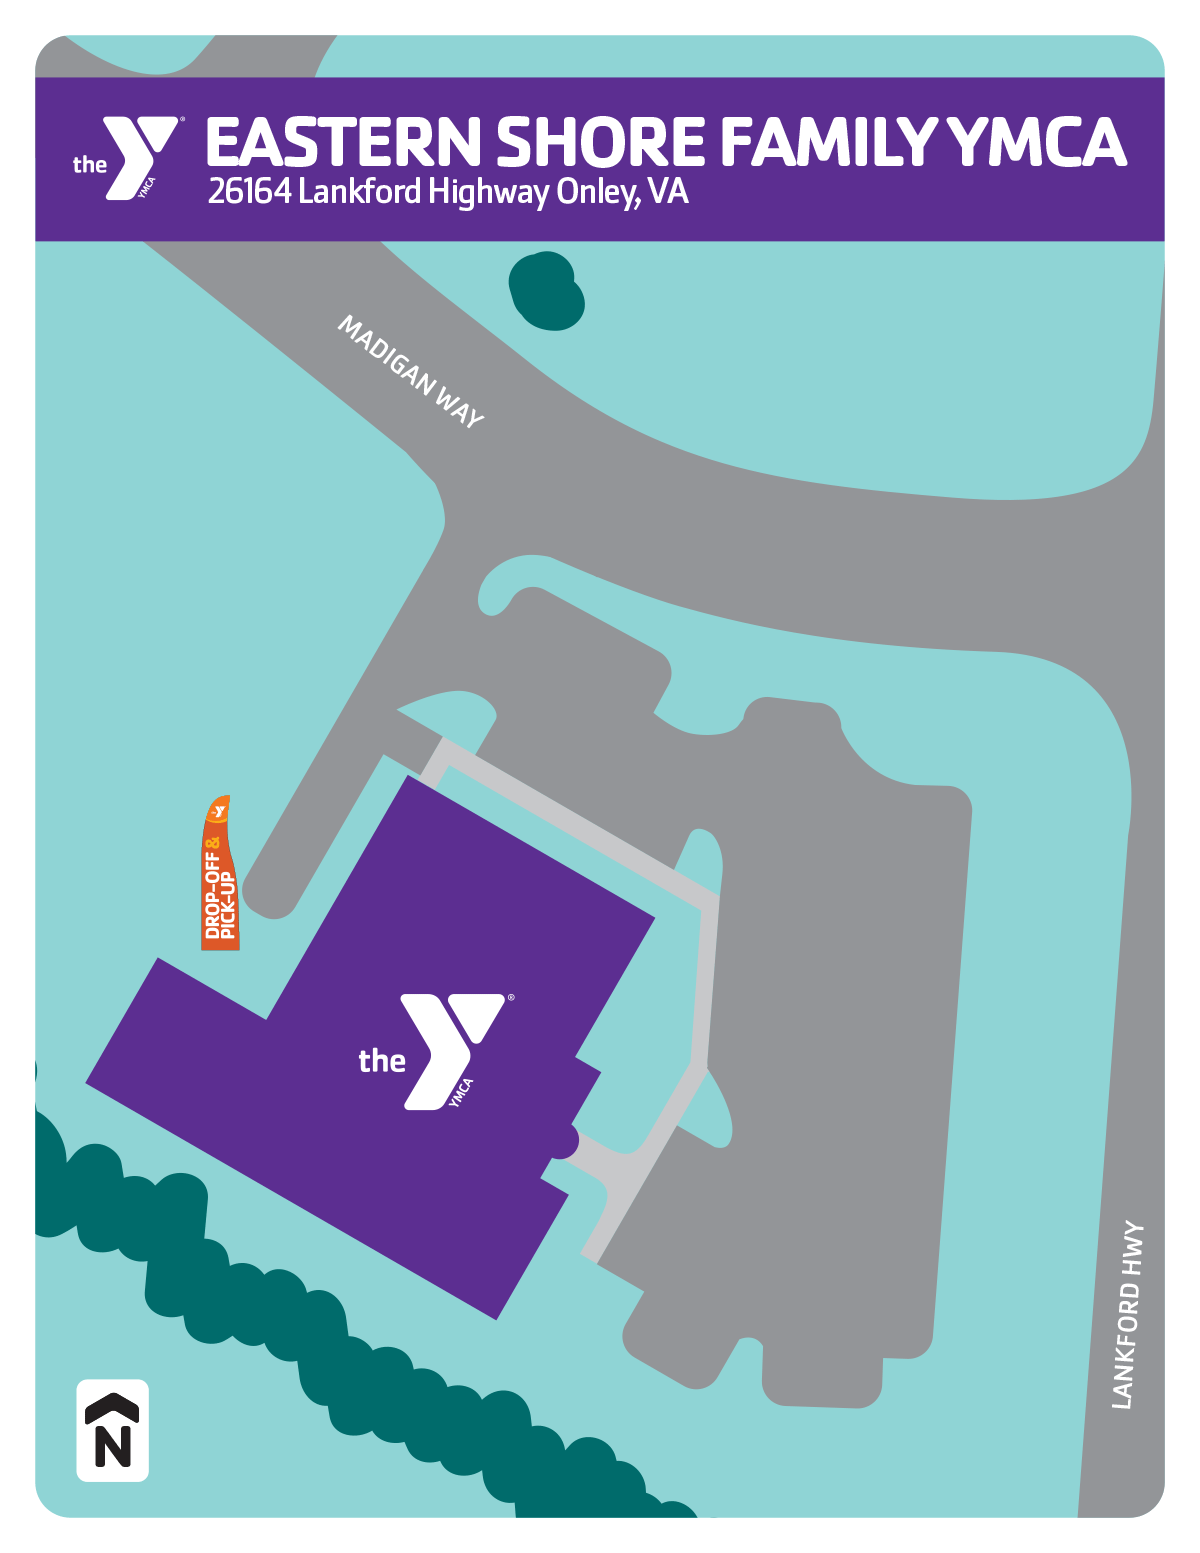 Summer camp drop-off & pick-up locations for the Eastern Shore Family YMCA